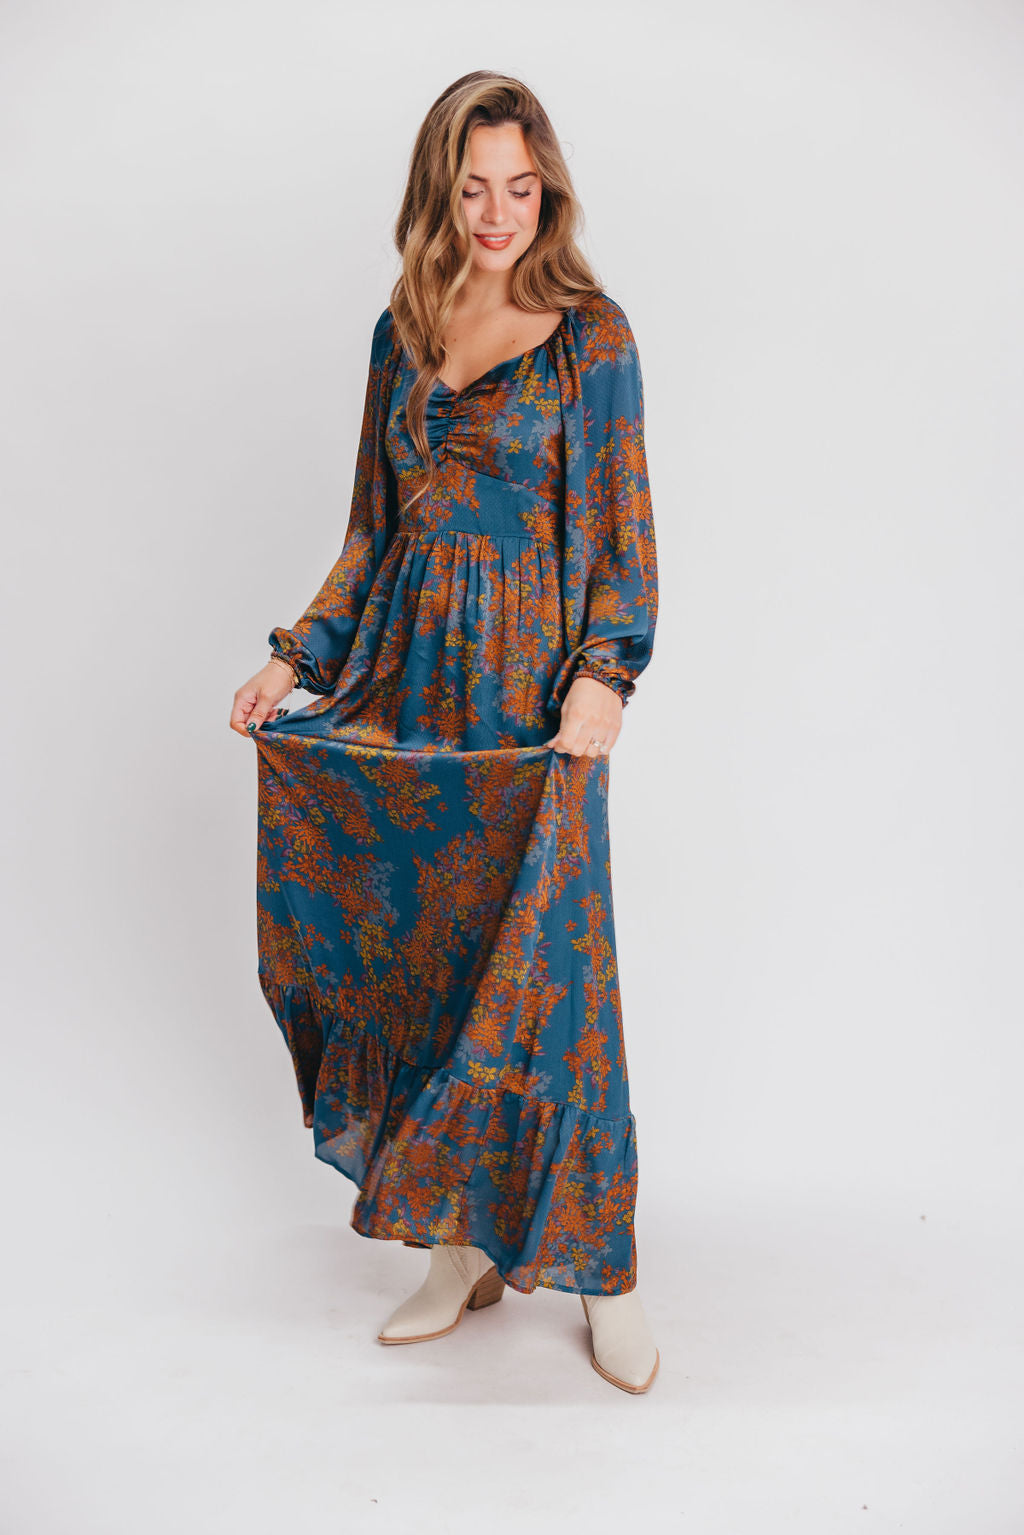 Emmy Sweetheart Neckline Maxi Dress in Teal / Mustard Floral - Bump Friendly - Inclusive Sizing (XS-3XL)